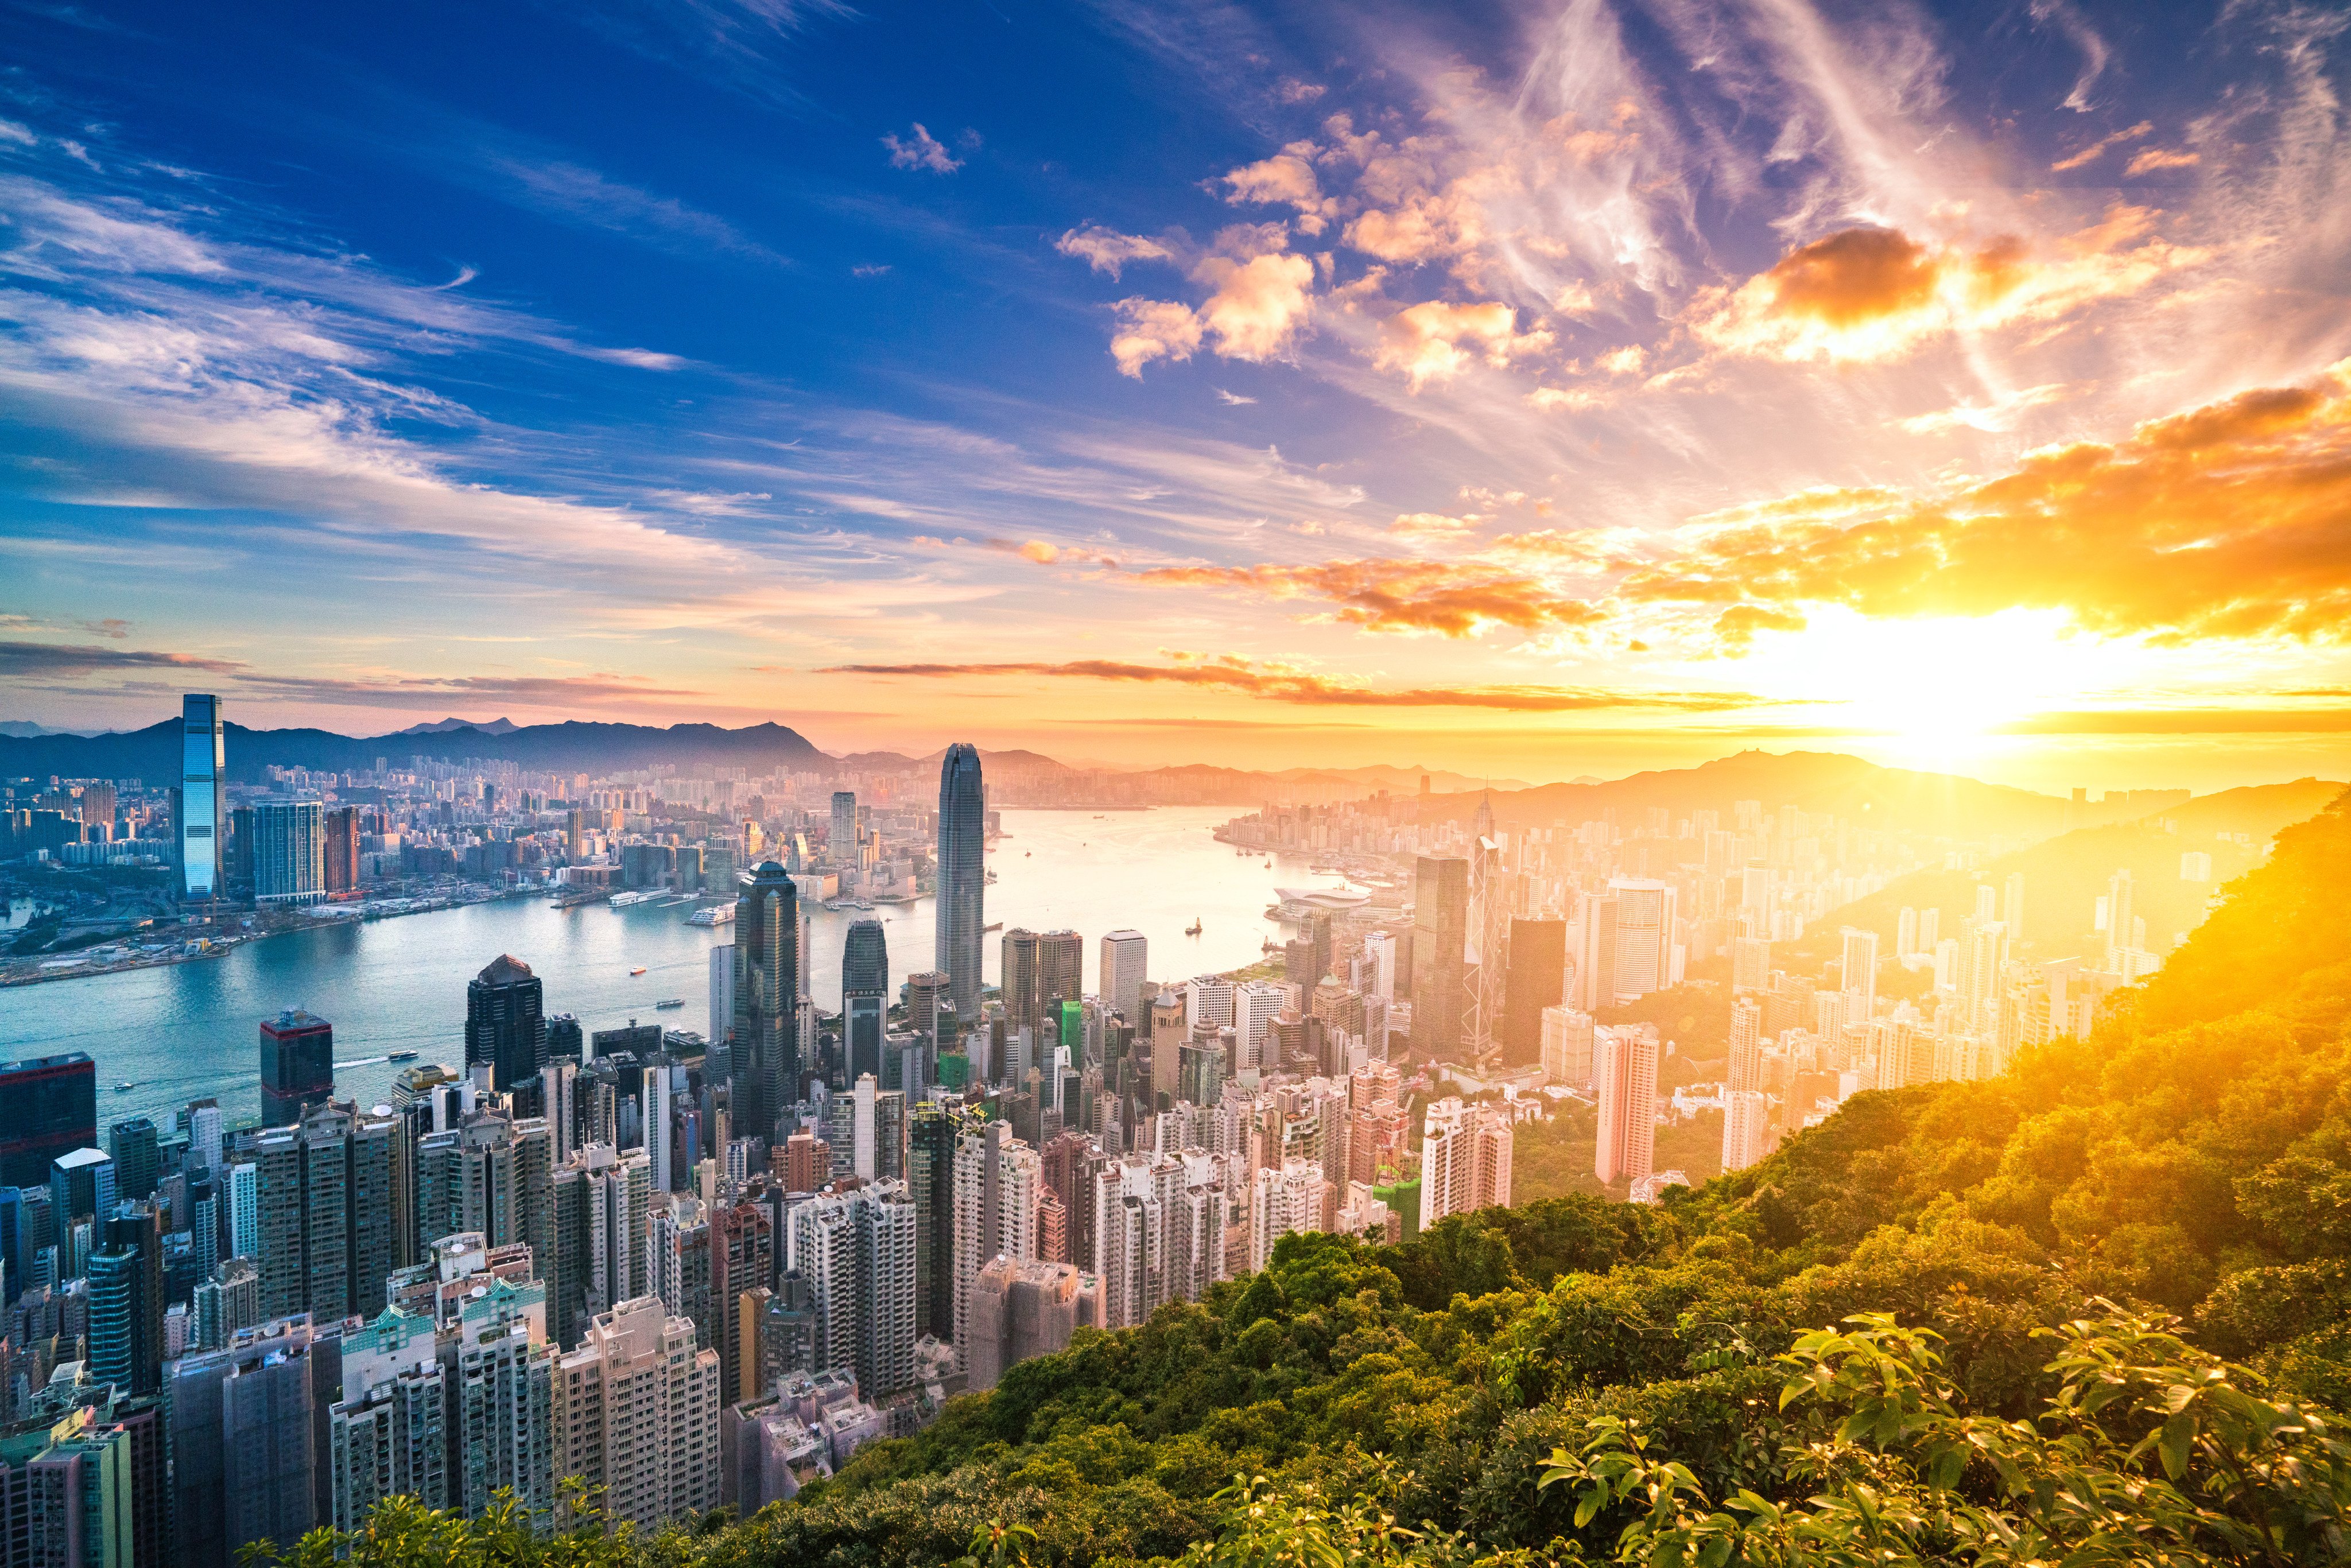 The Hong Kong skyline at sunrise. Hong Kong is still a safe, well-connected, vibrant and dynamic place to live, work and visit. Photo: Getty Images/iStockphoto